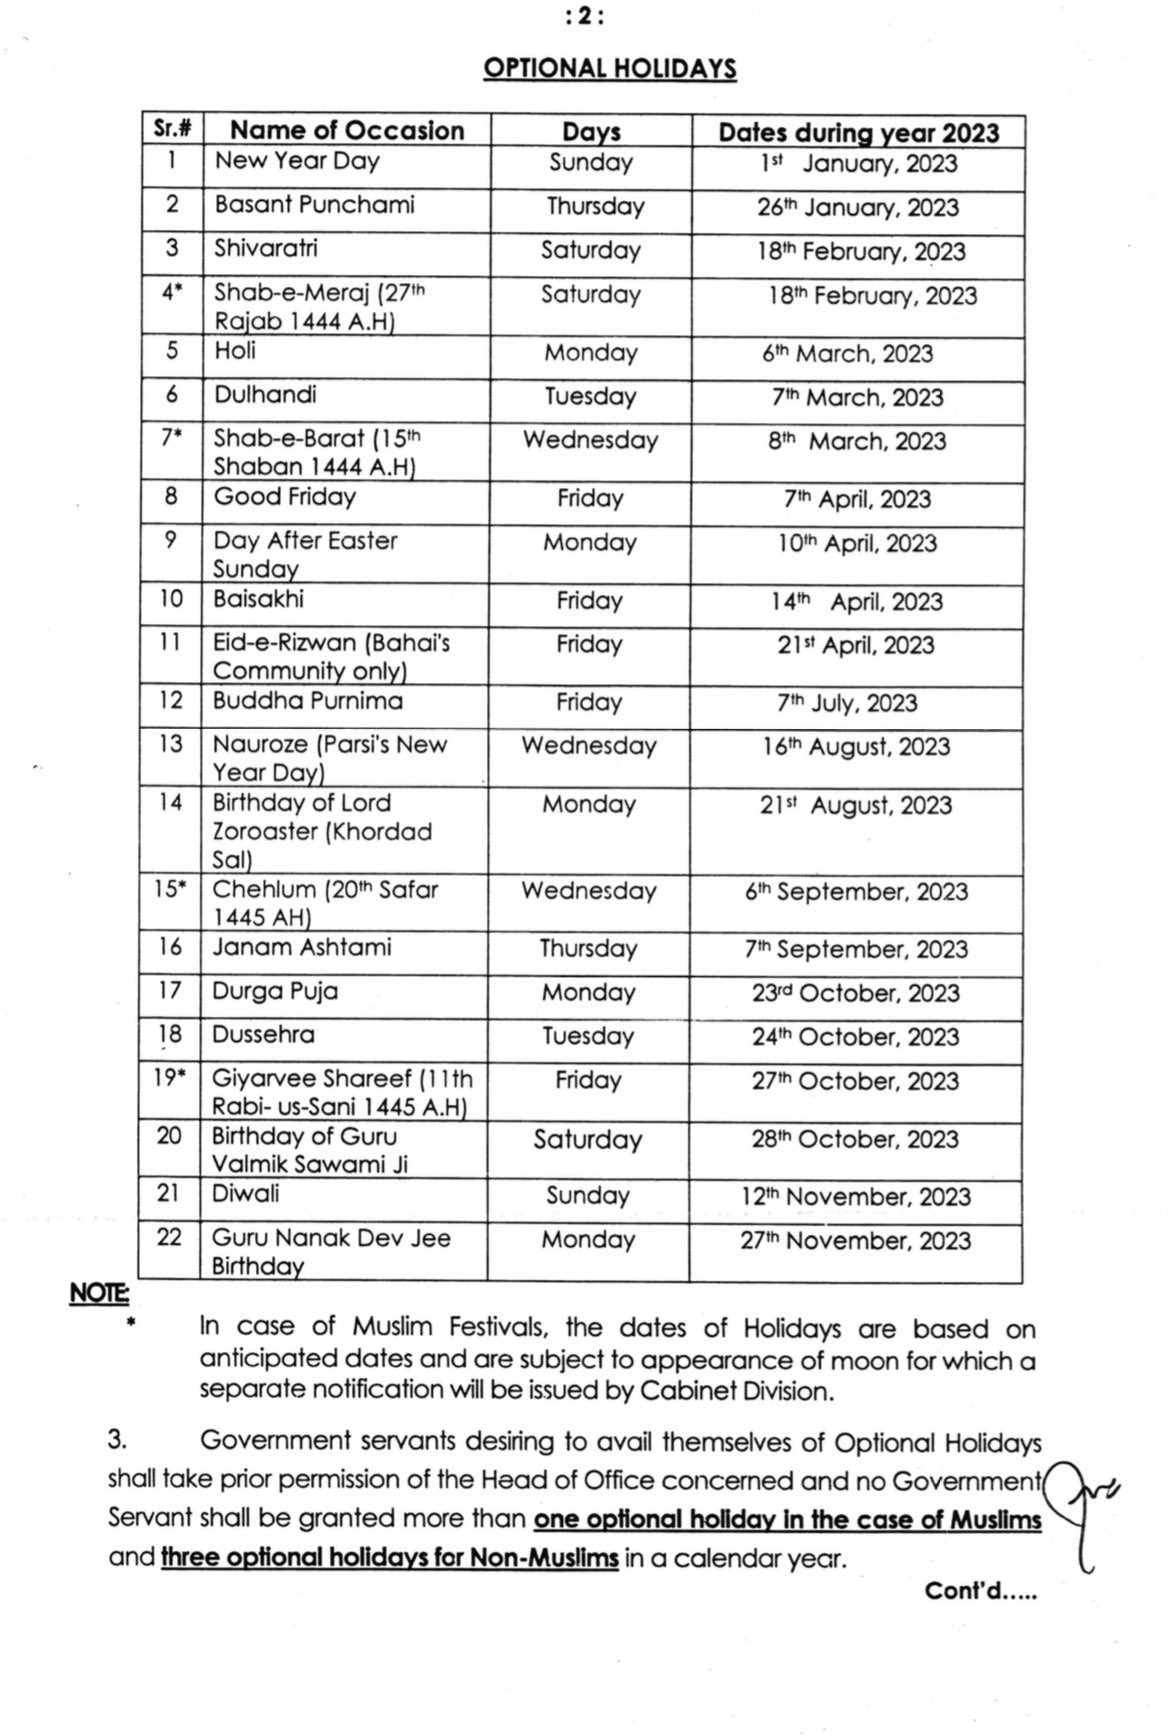 List of Public Holidays for 2023 – Federal Govt of Pakistan